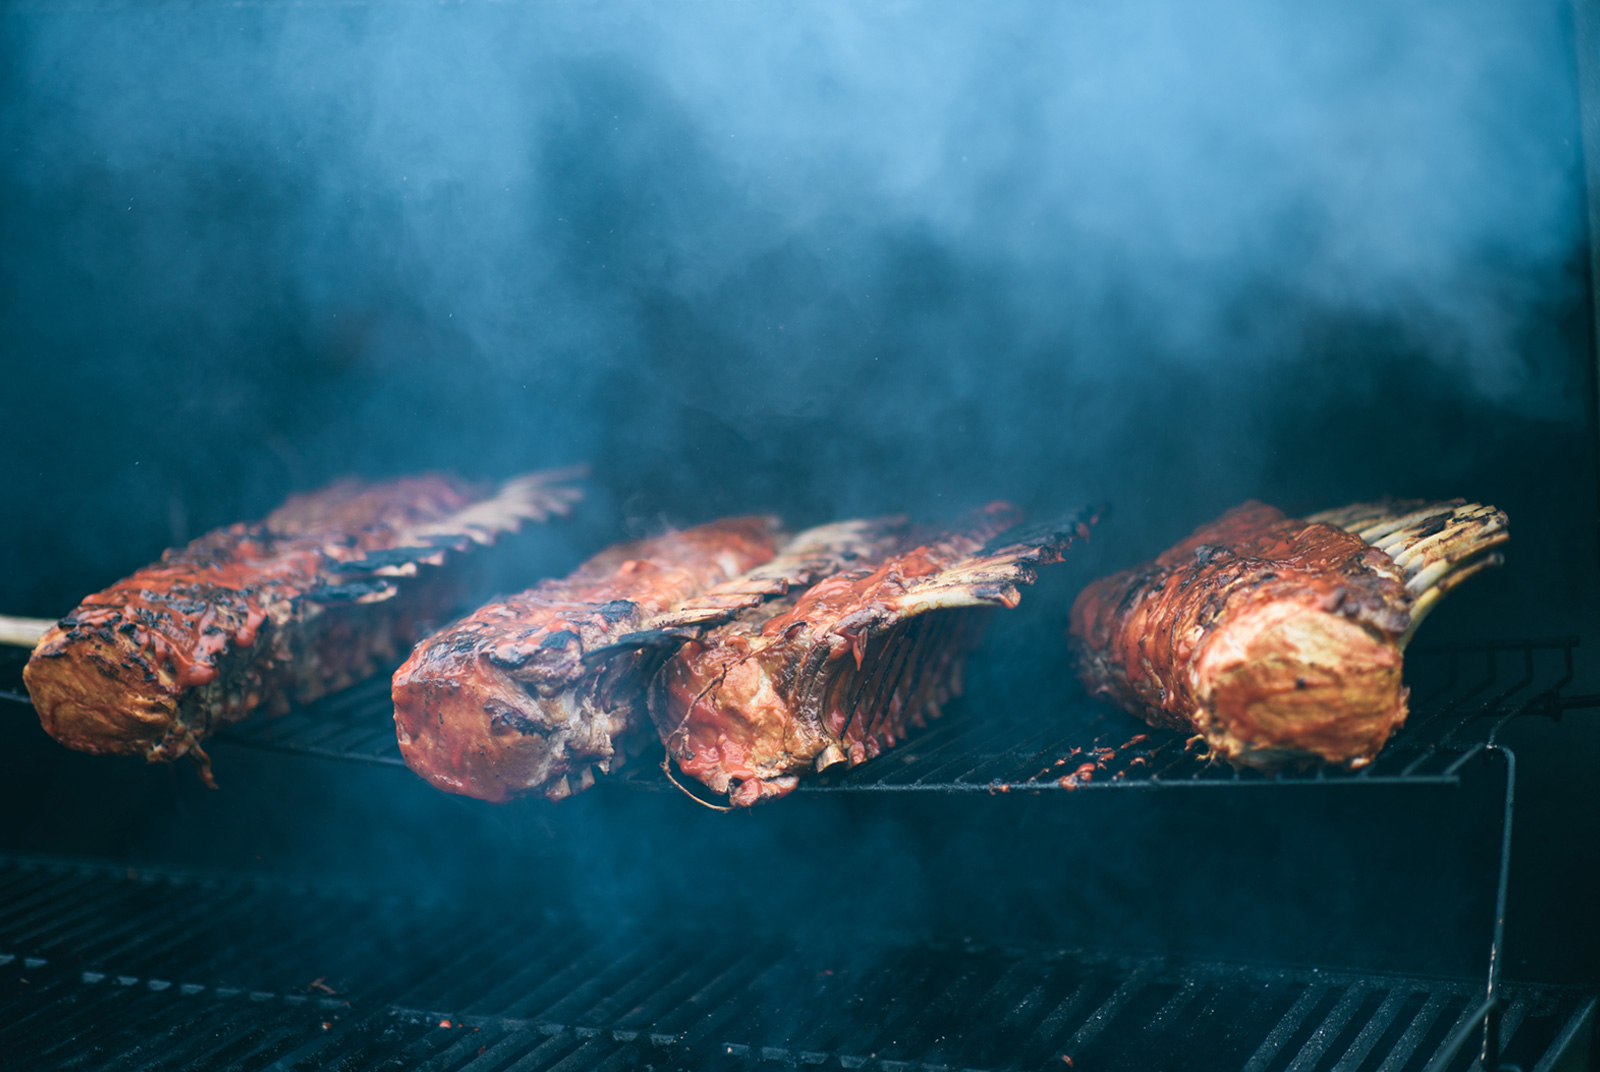 Four racks of lamb on a grill